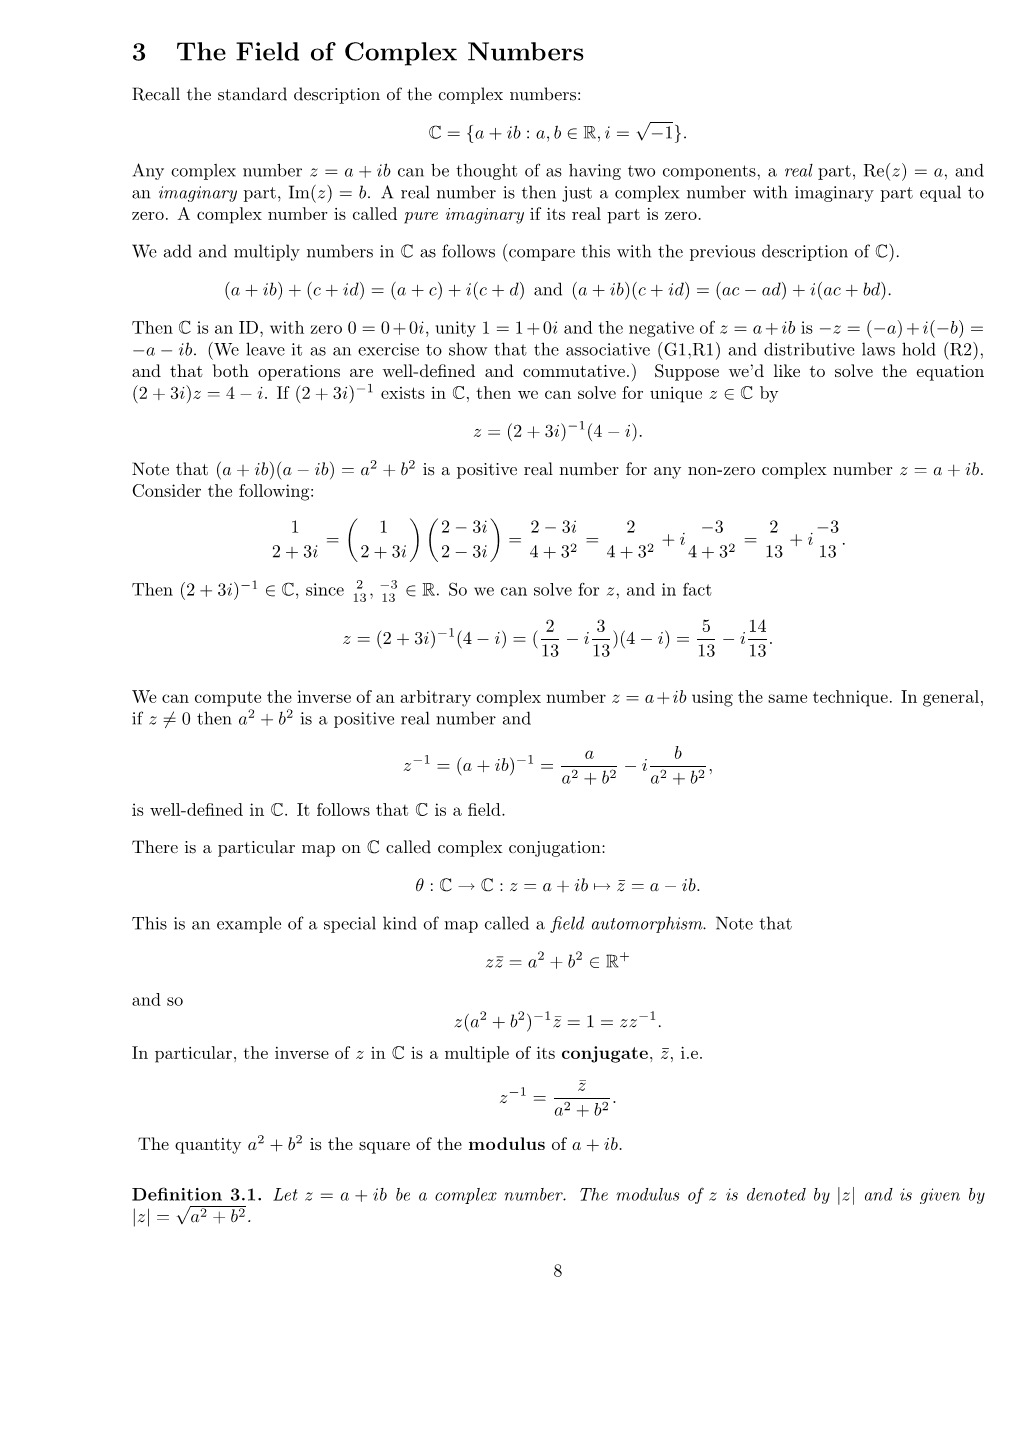 Chapter 3: the Field of Complex Numbers